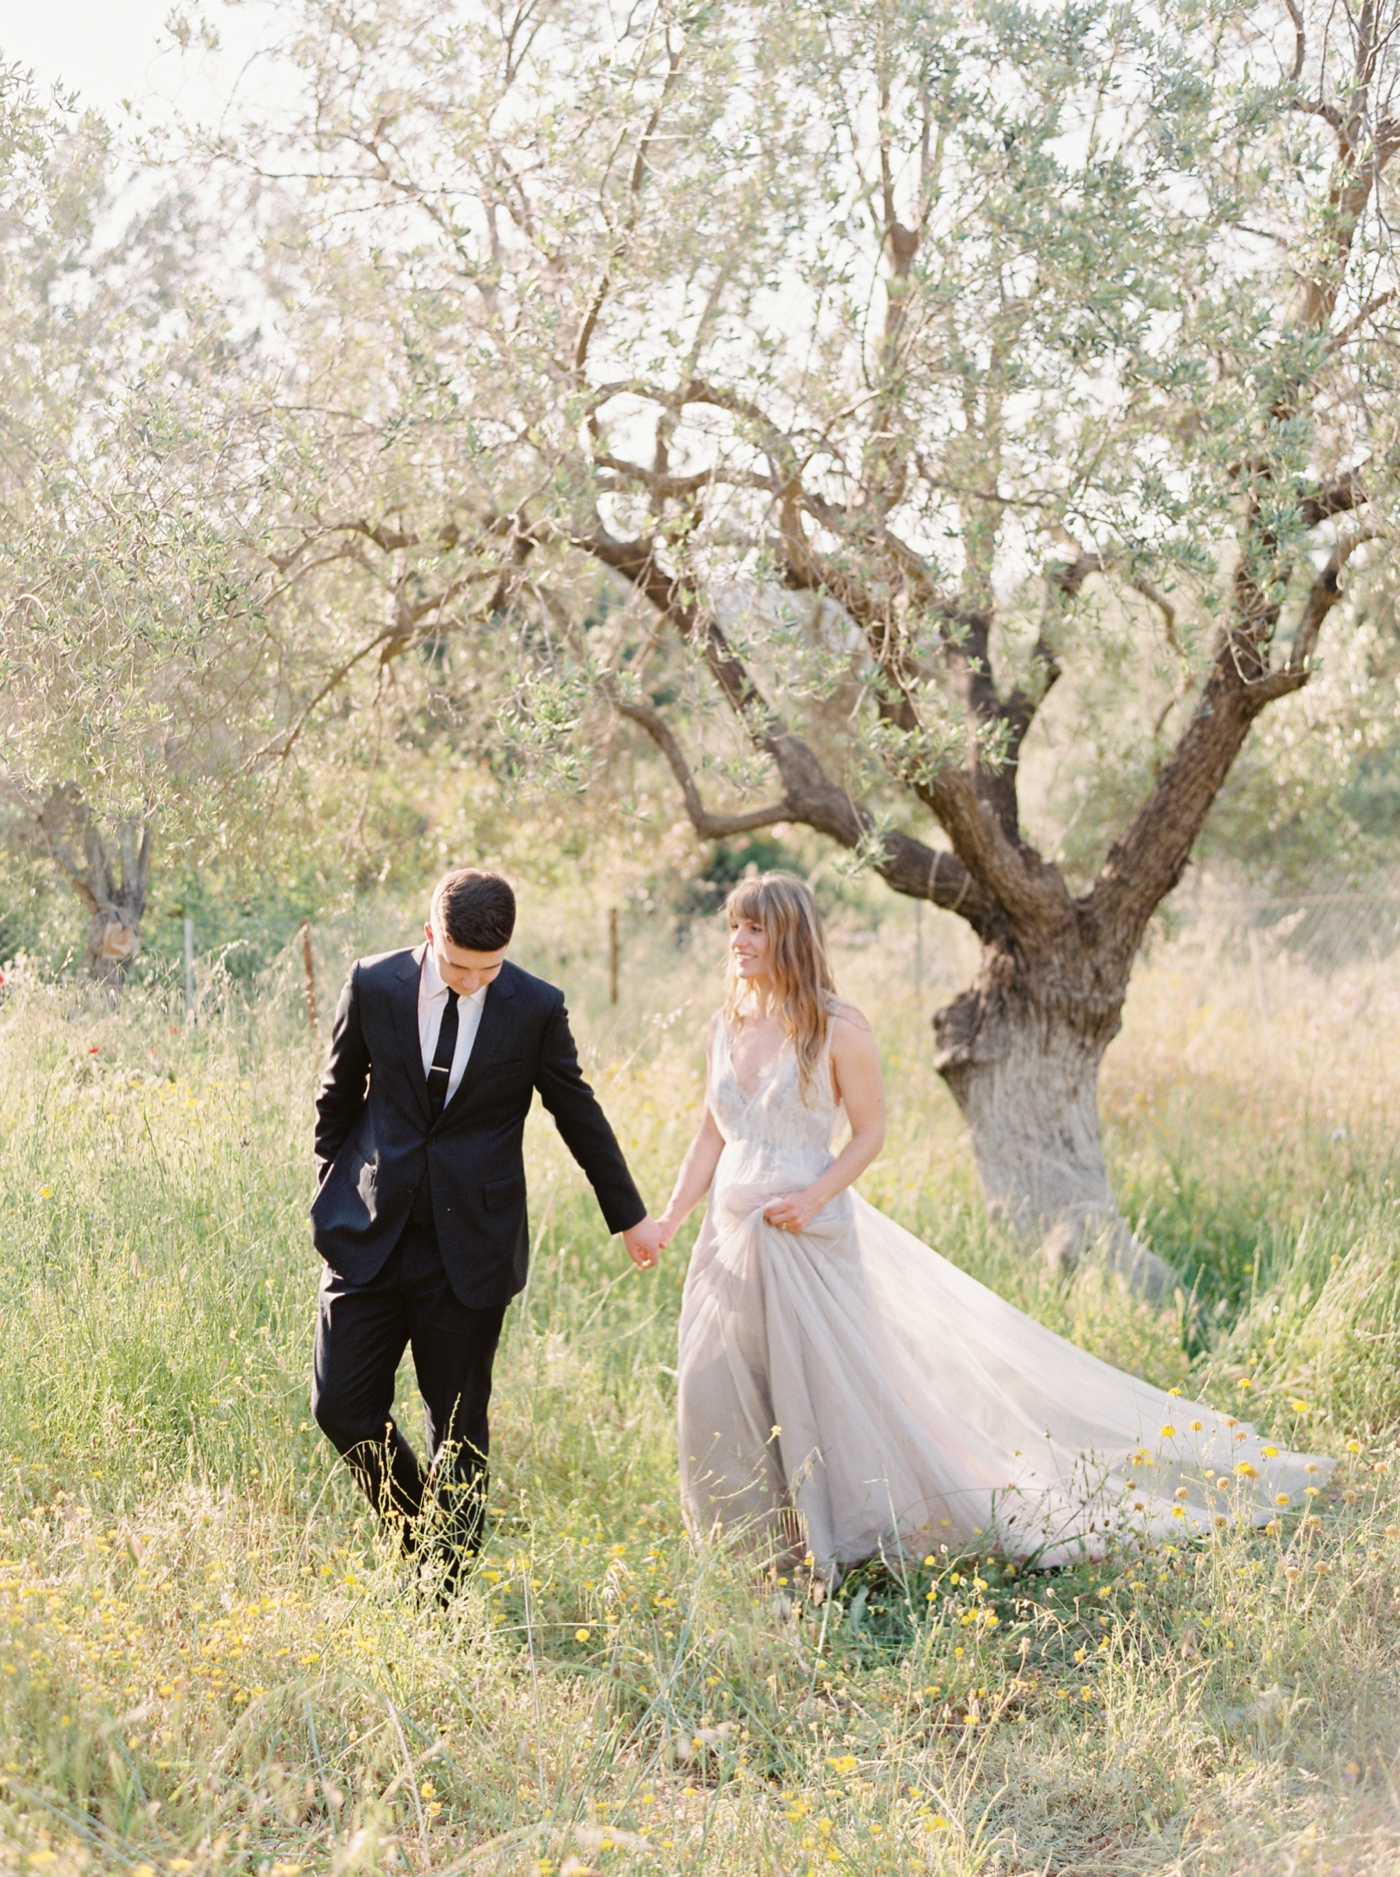 Greece wedding photographers | bride and groom in an olive grove | samuelle couture wedding dress